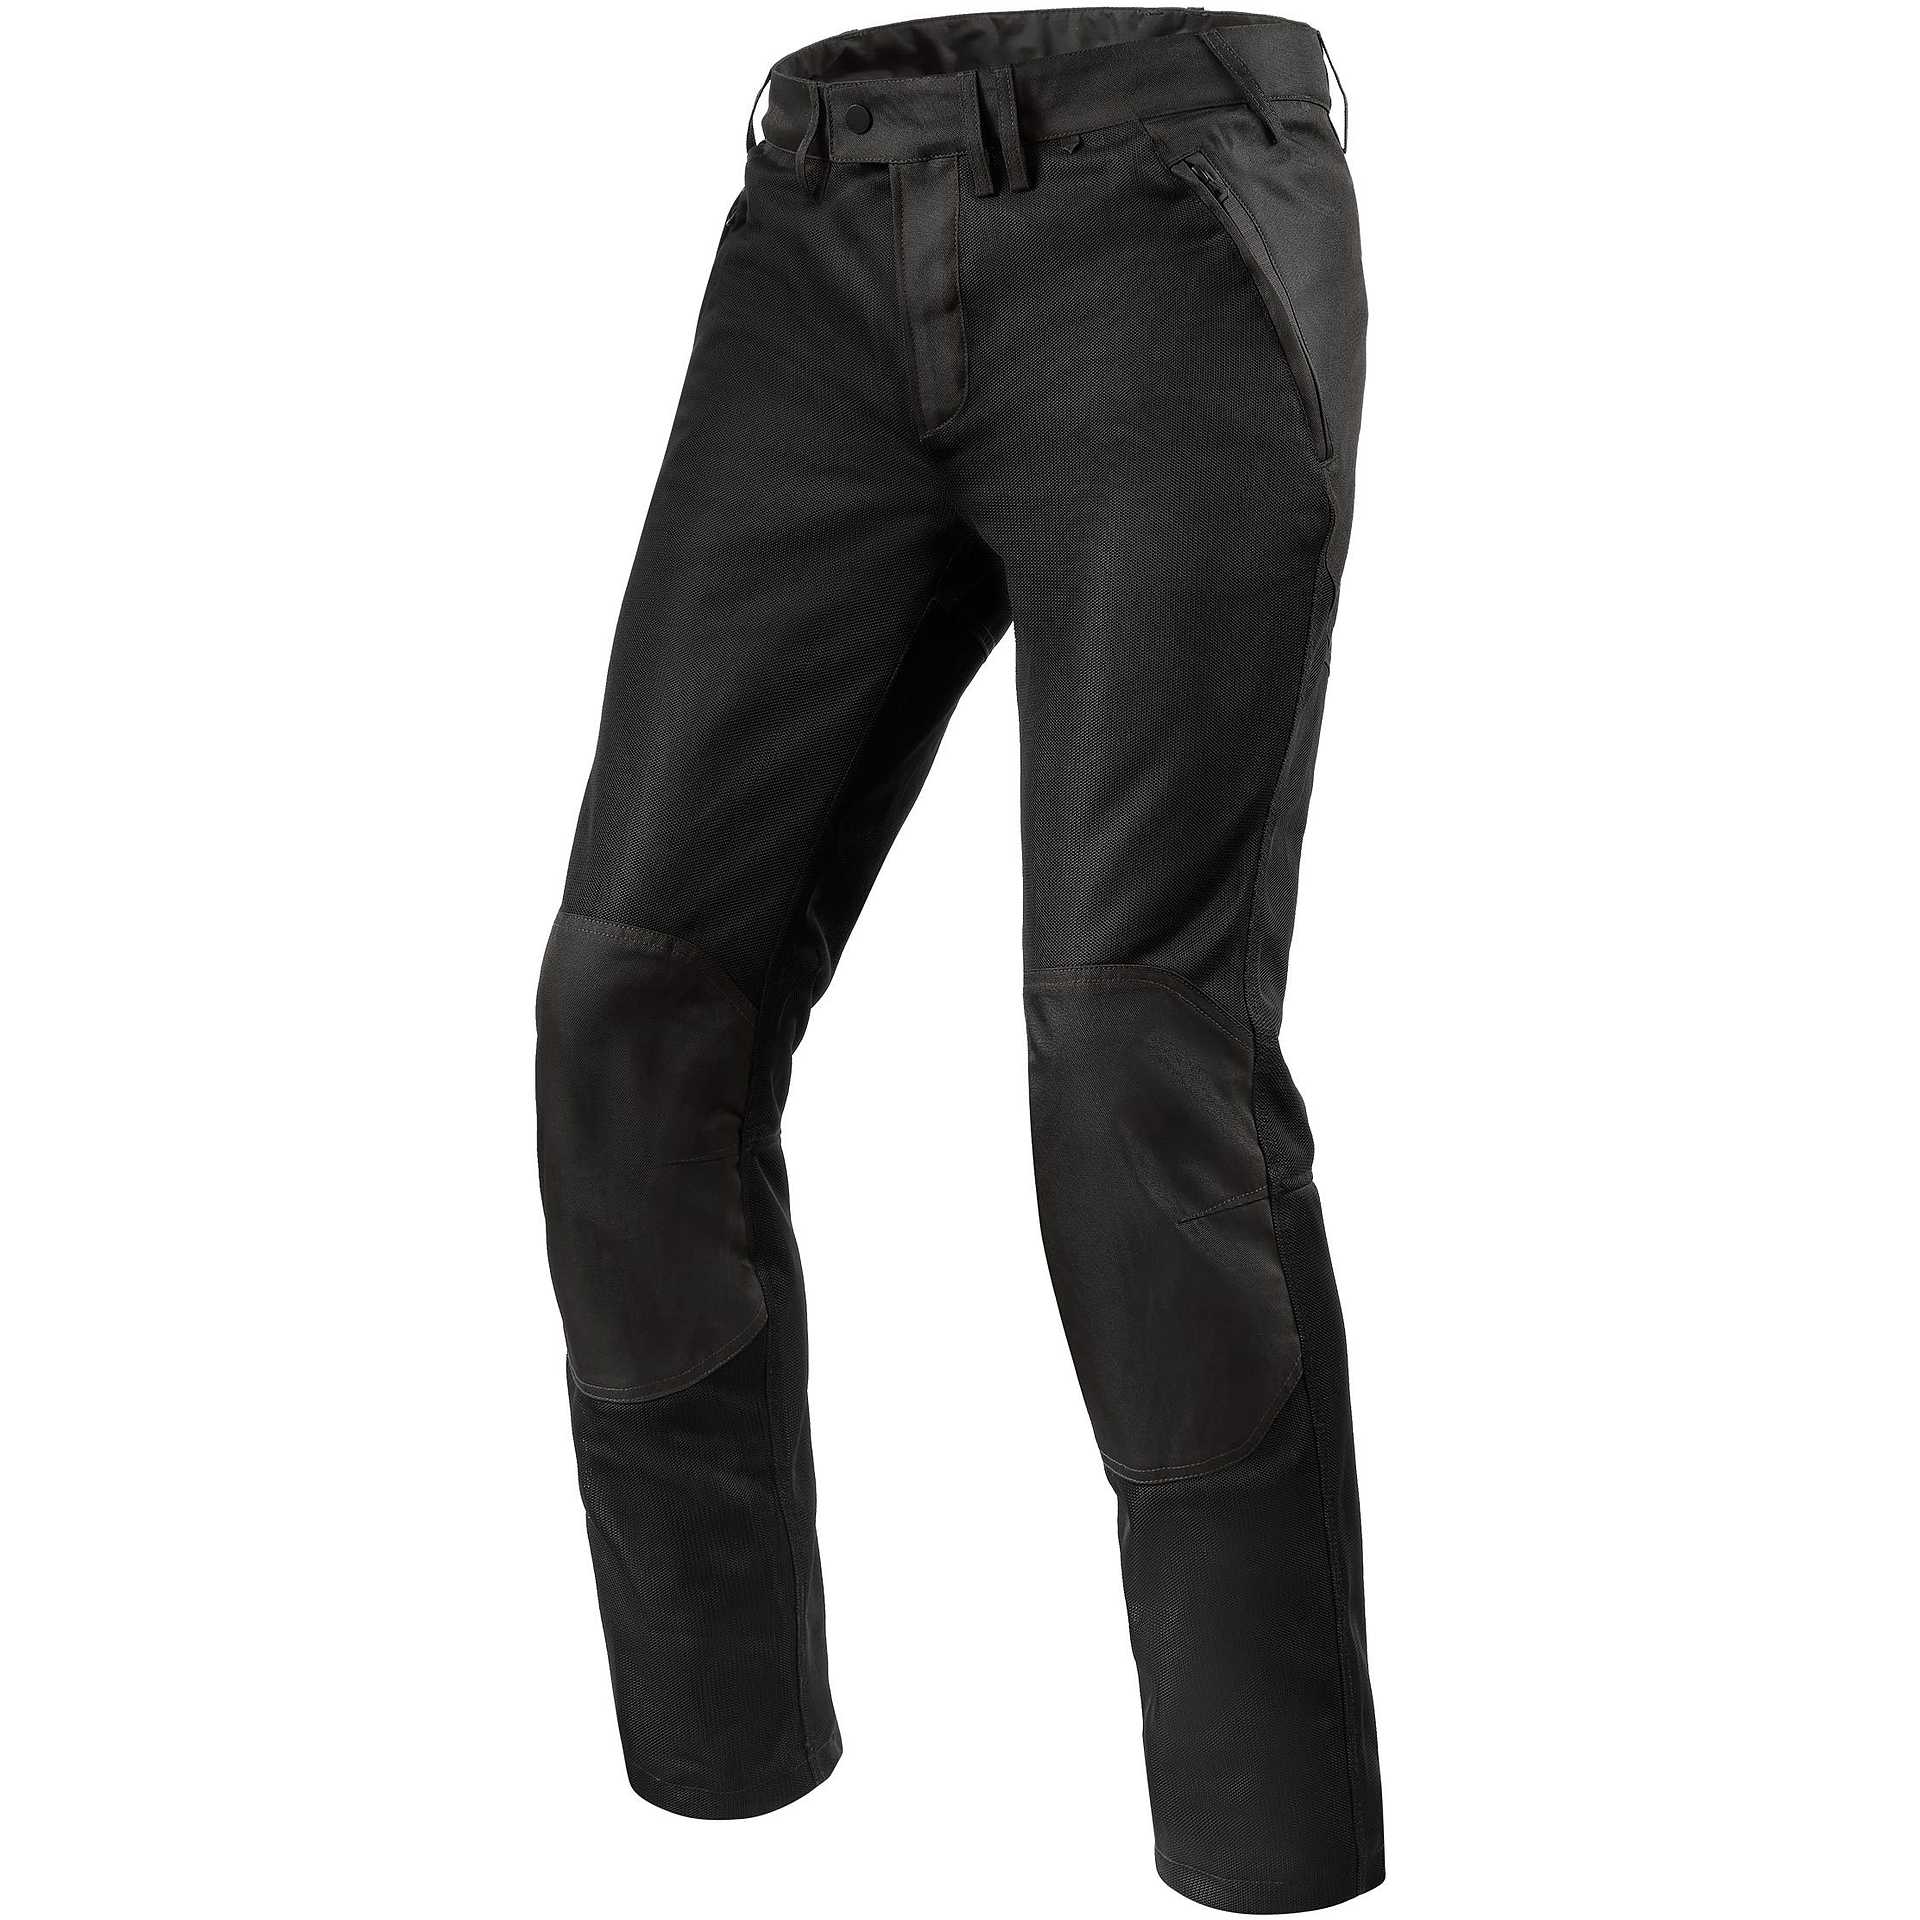 Rev'it ECLIPSE Black Stretched Summer Motorcycle Pants For Sale